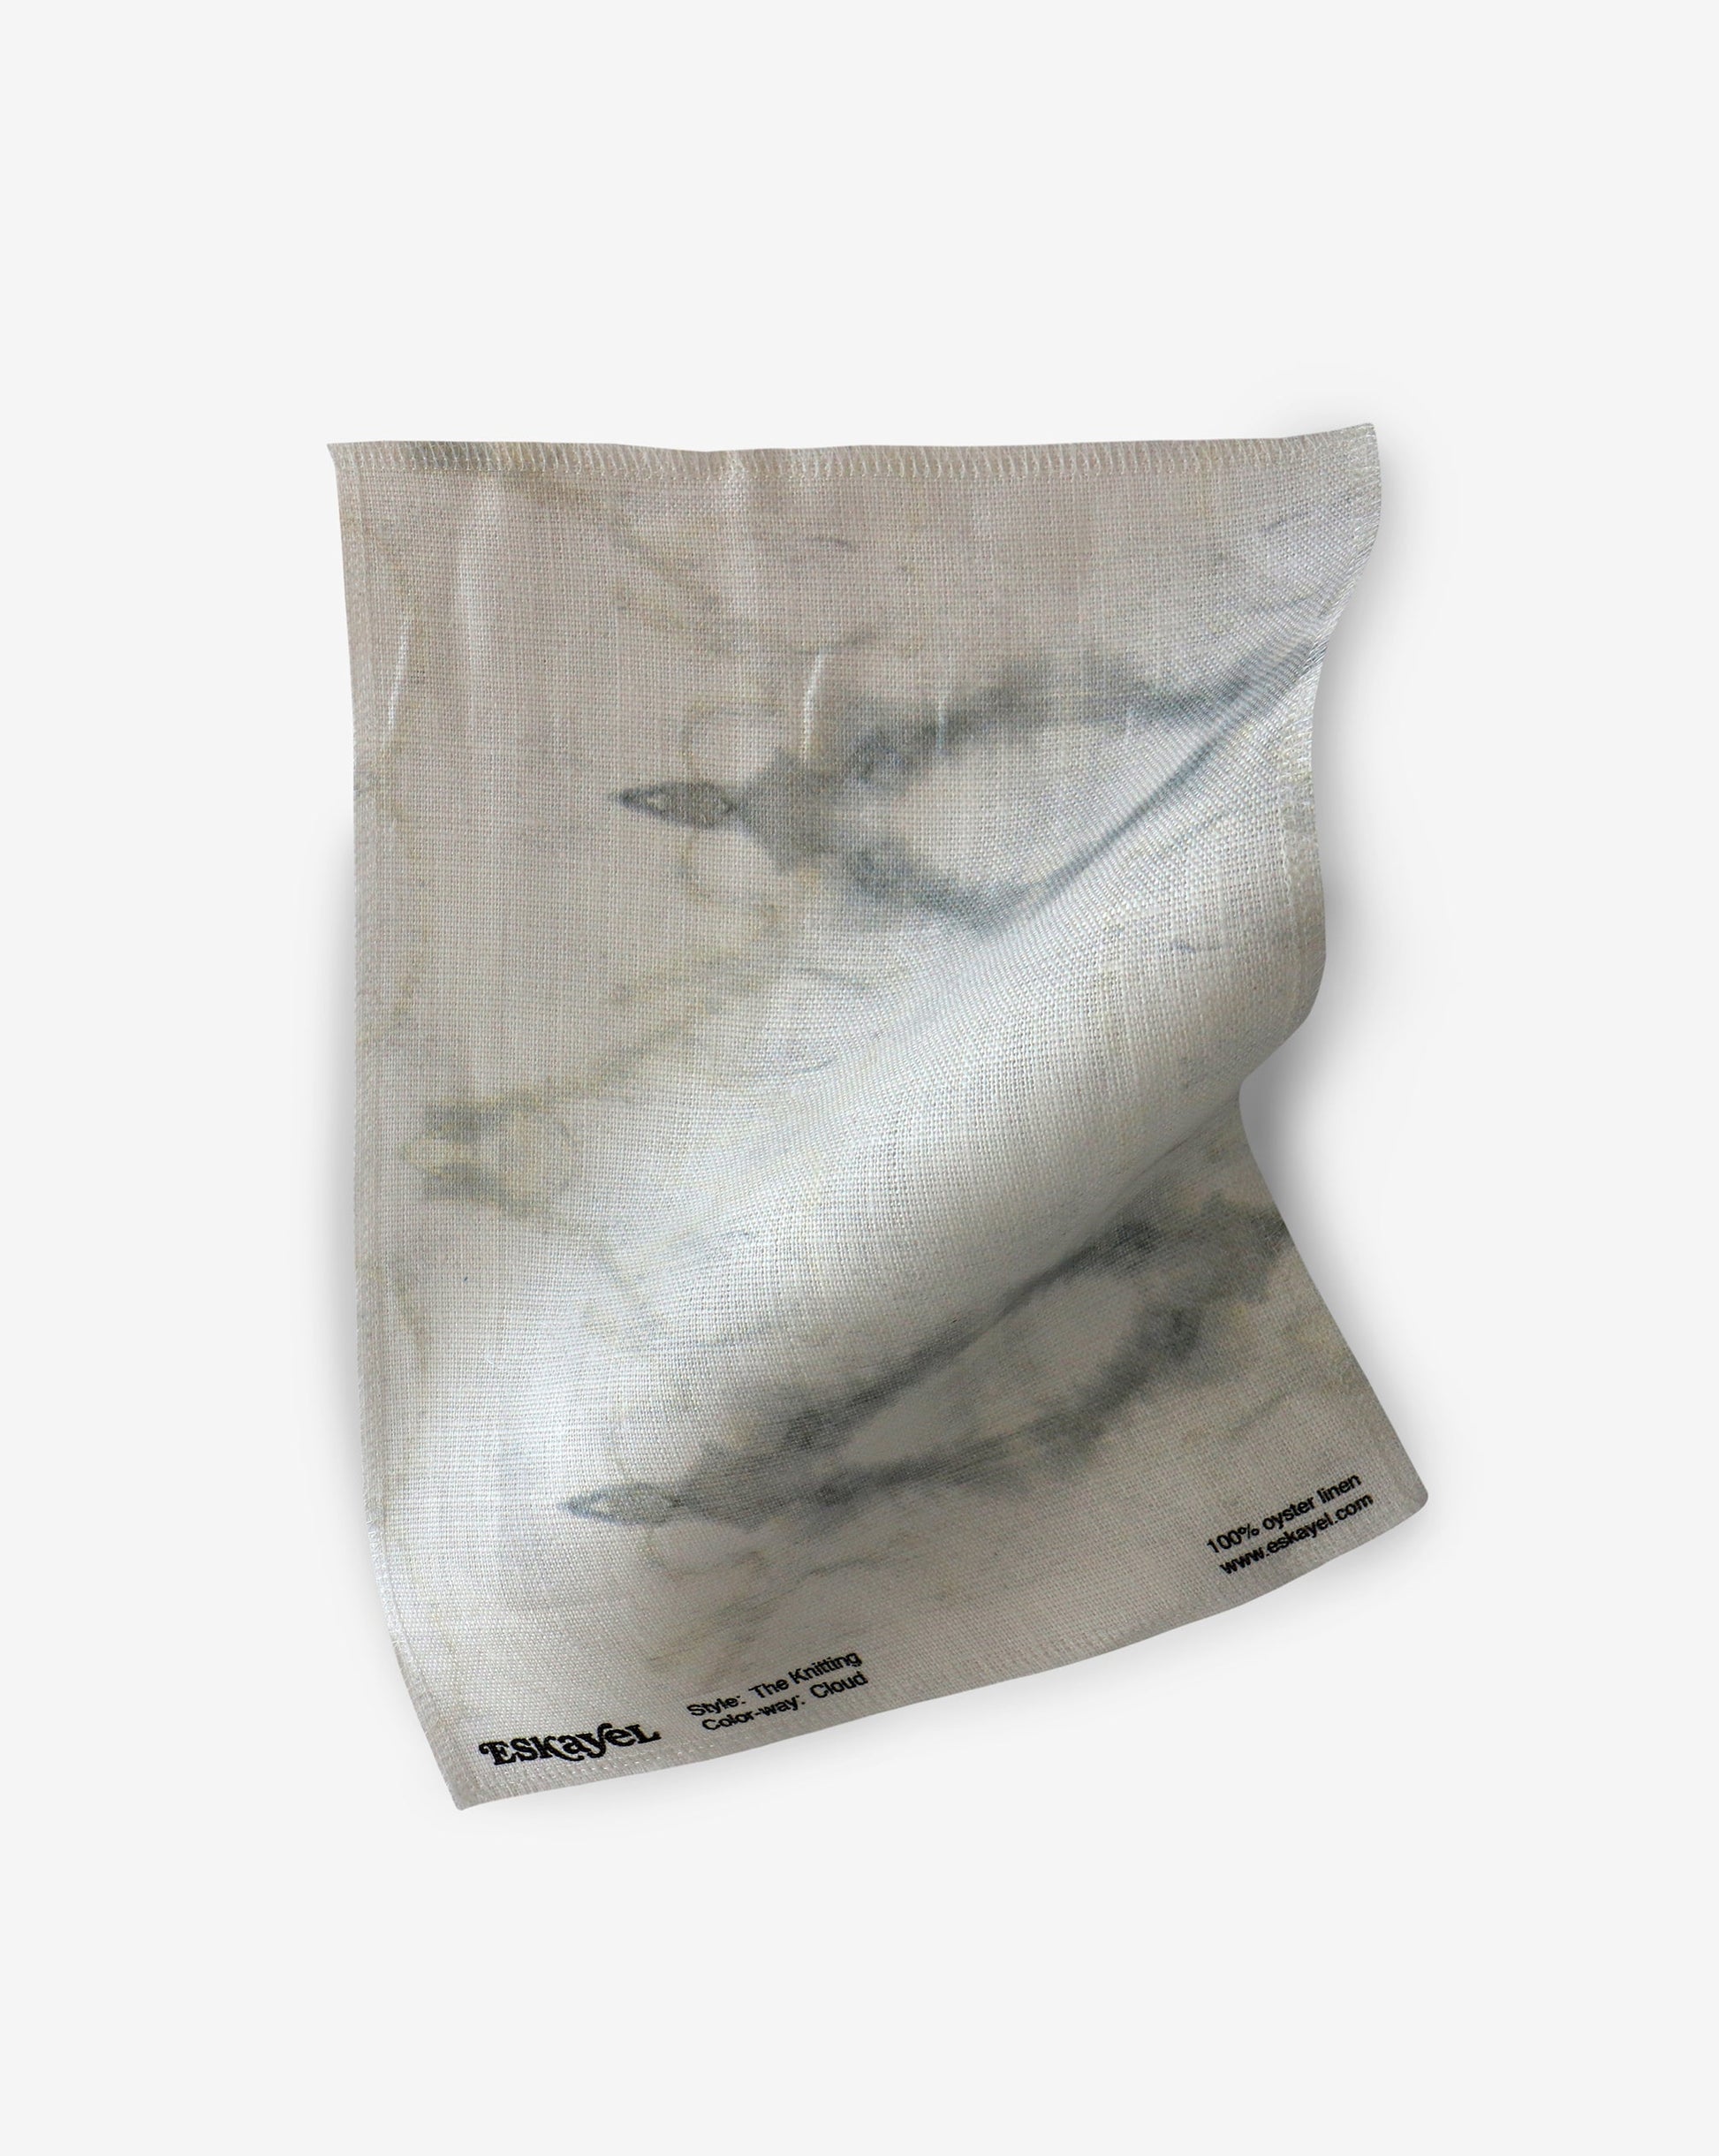 A white fabric from The Knitting Fabric Cloud Collection with a marble pattern on it